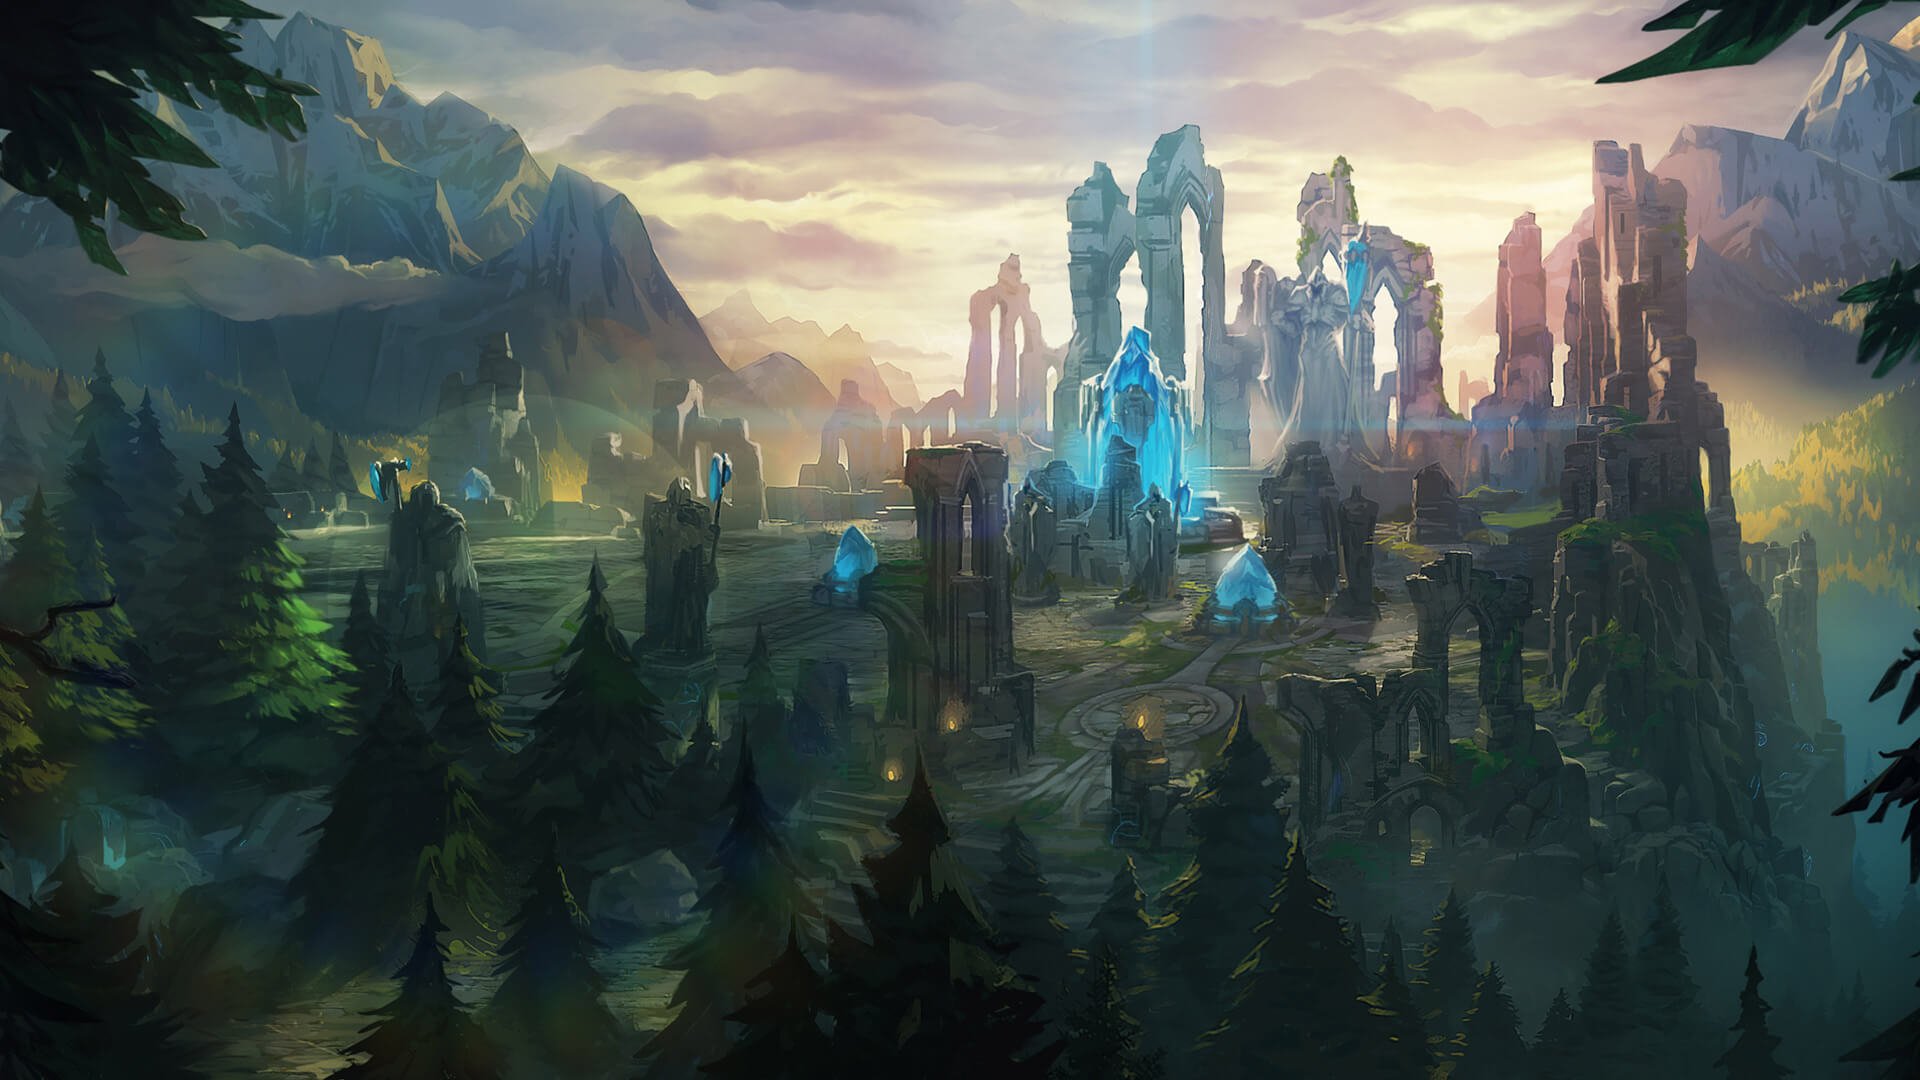 Drawing of League of Legends' Summoner's Rift